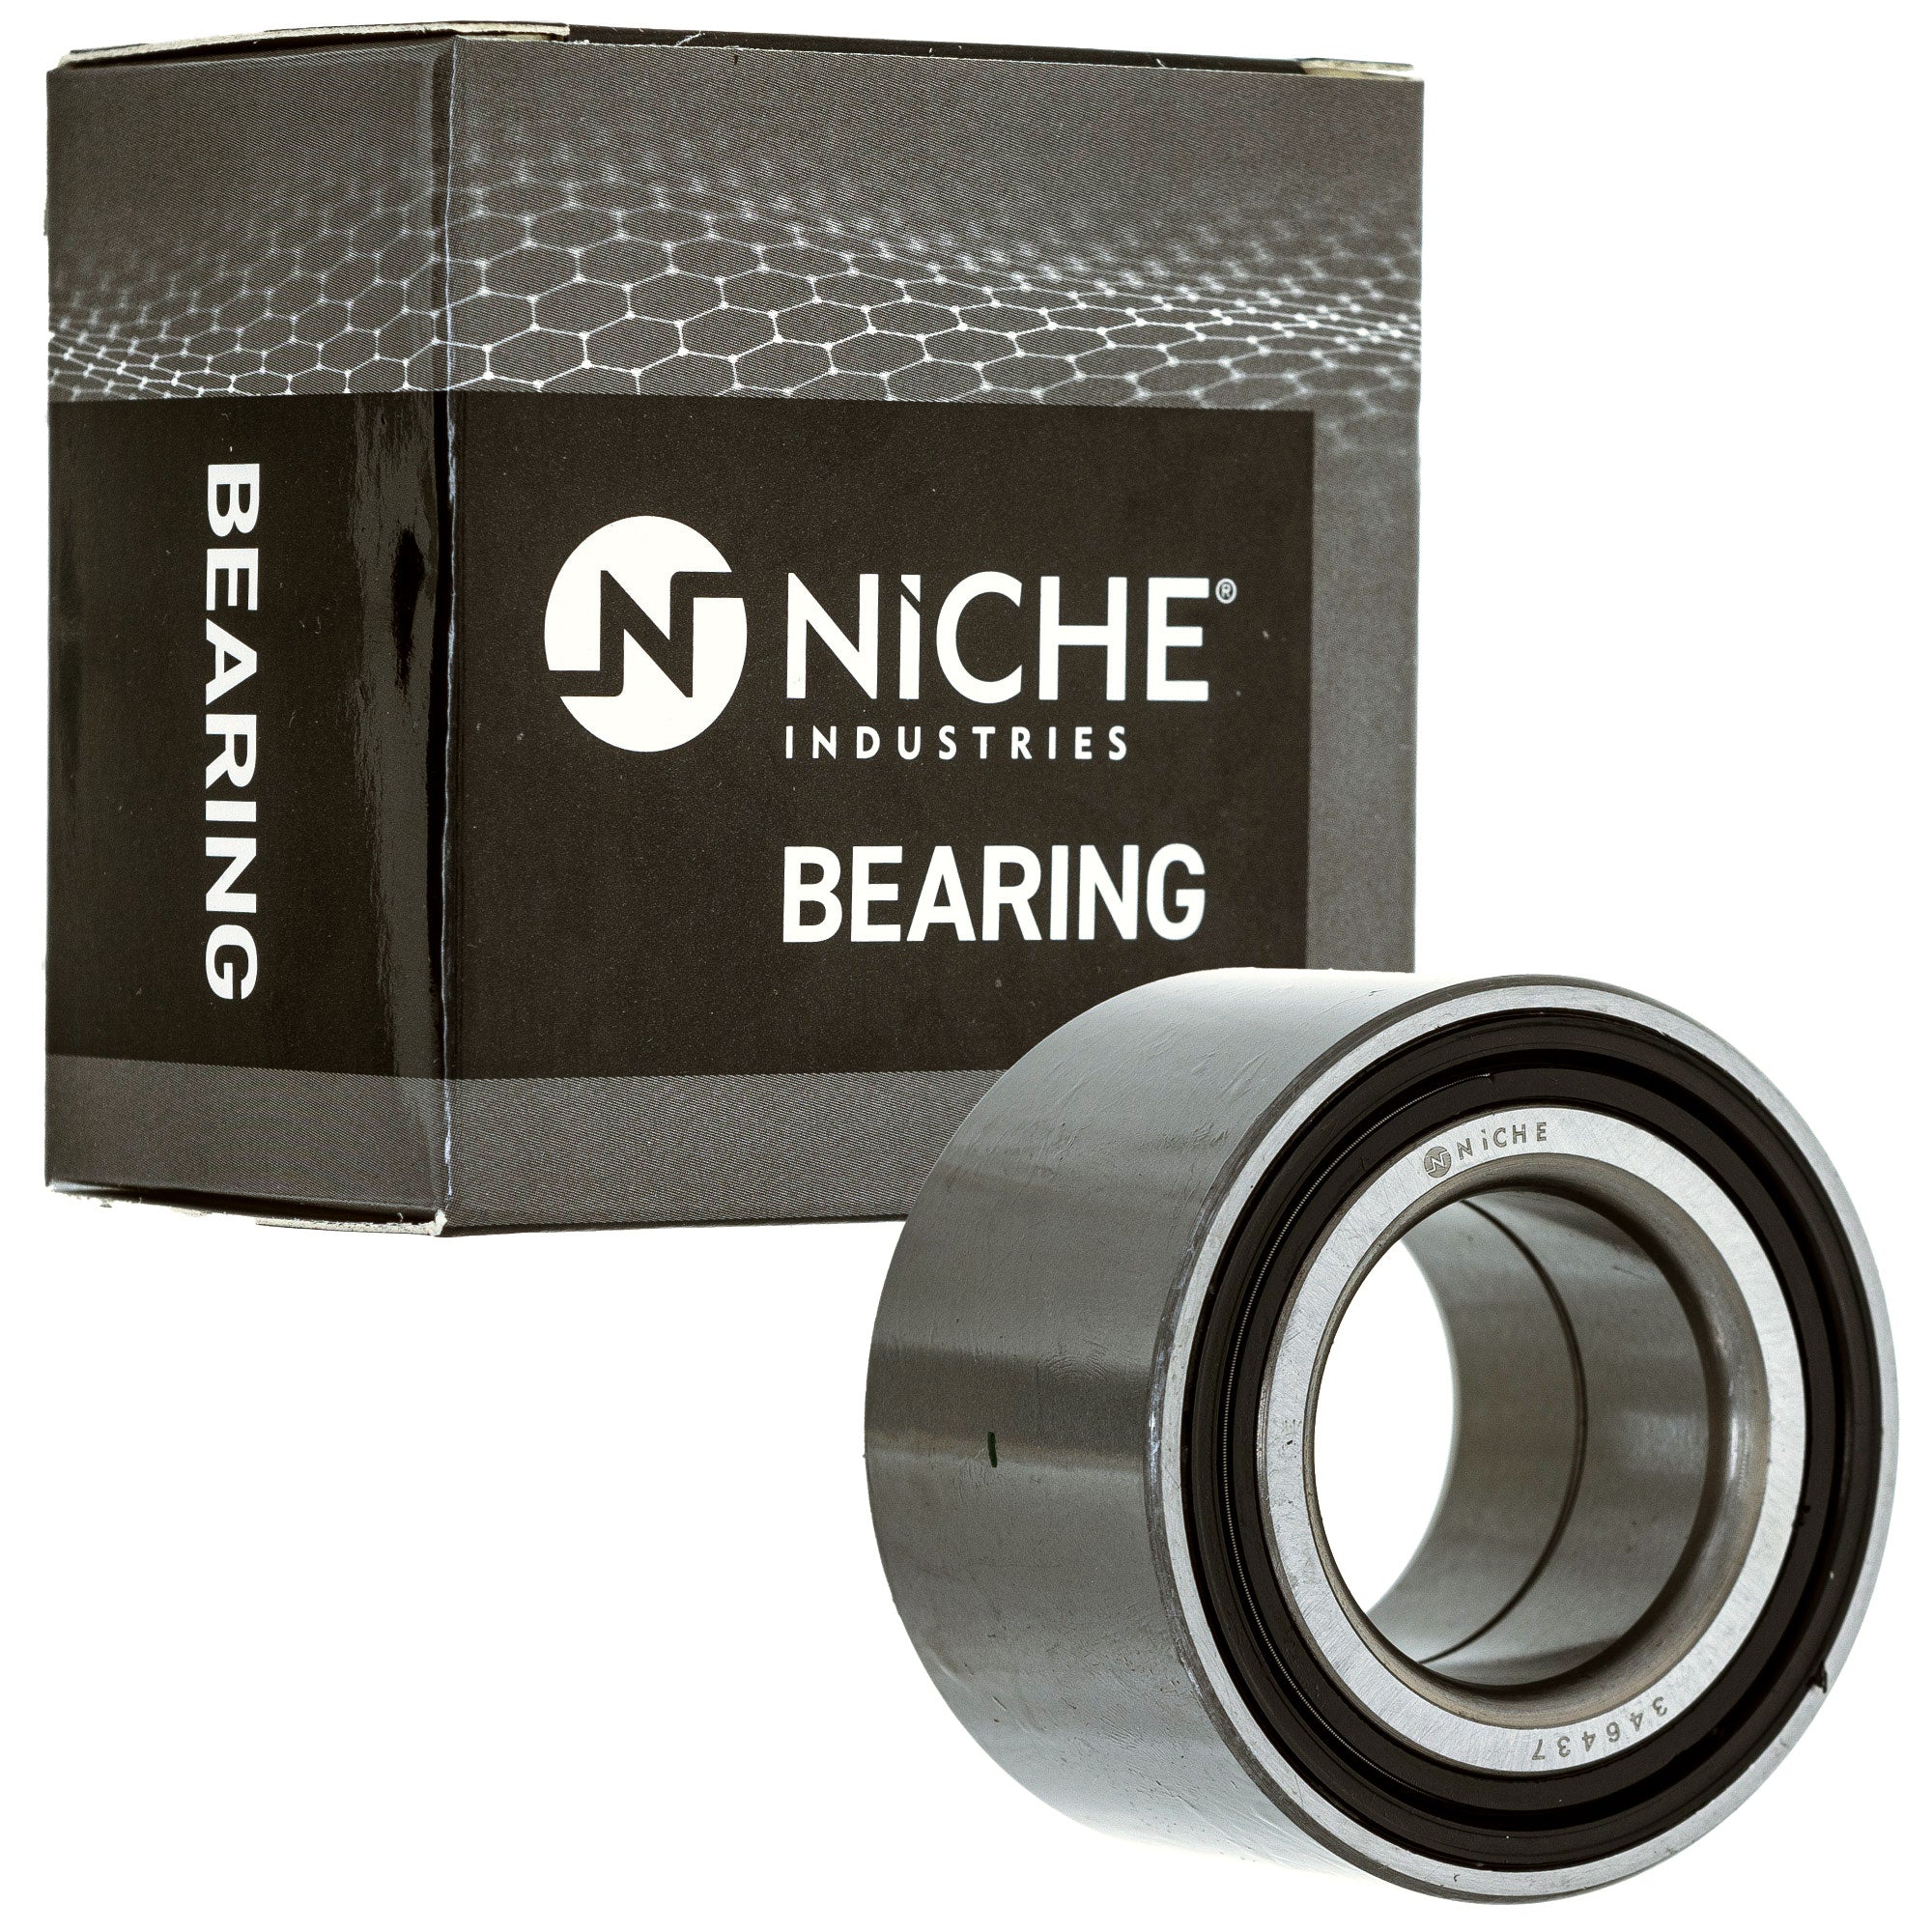 NICHE 519-CBB2200R Bearing 2-Pack for zOTHER Trials Trail Touring